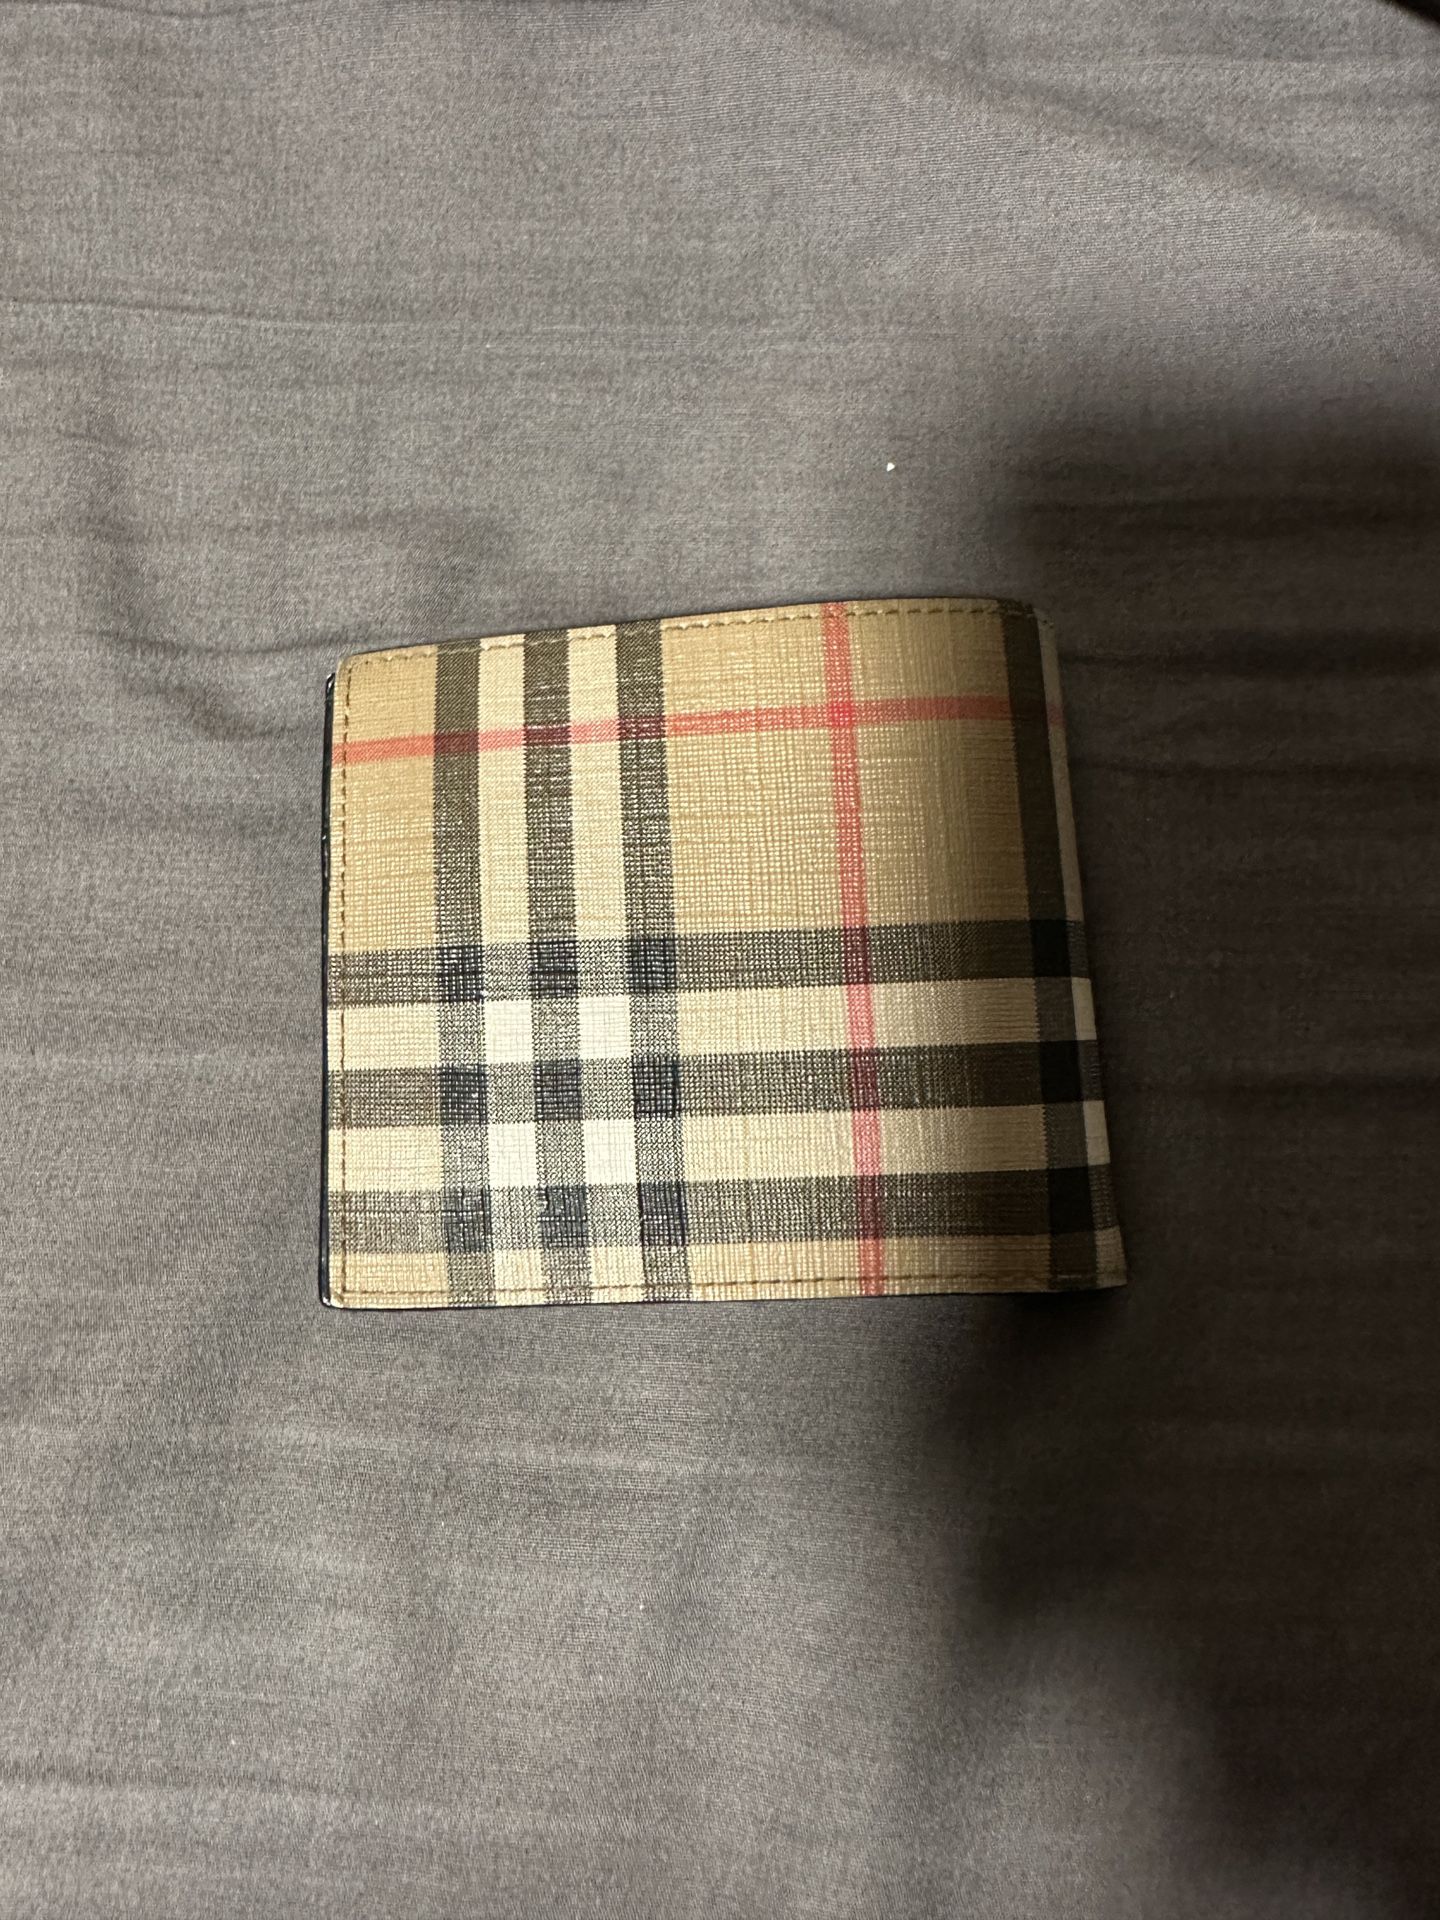 Burberry Wallet for Sale in Hillsboro, OR - OfferUp